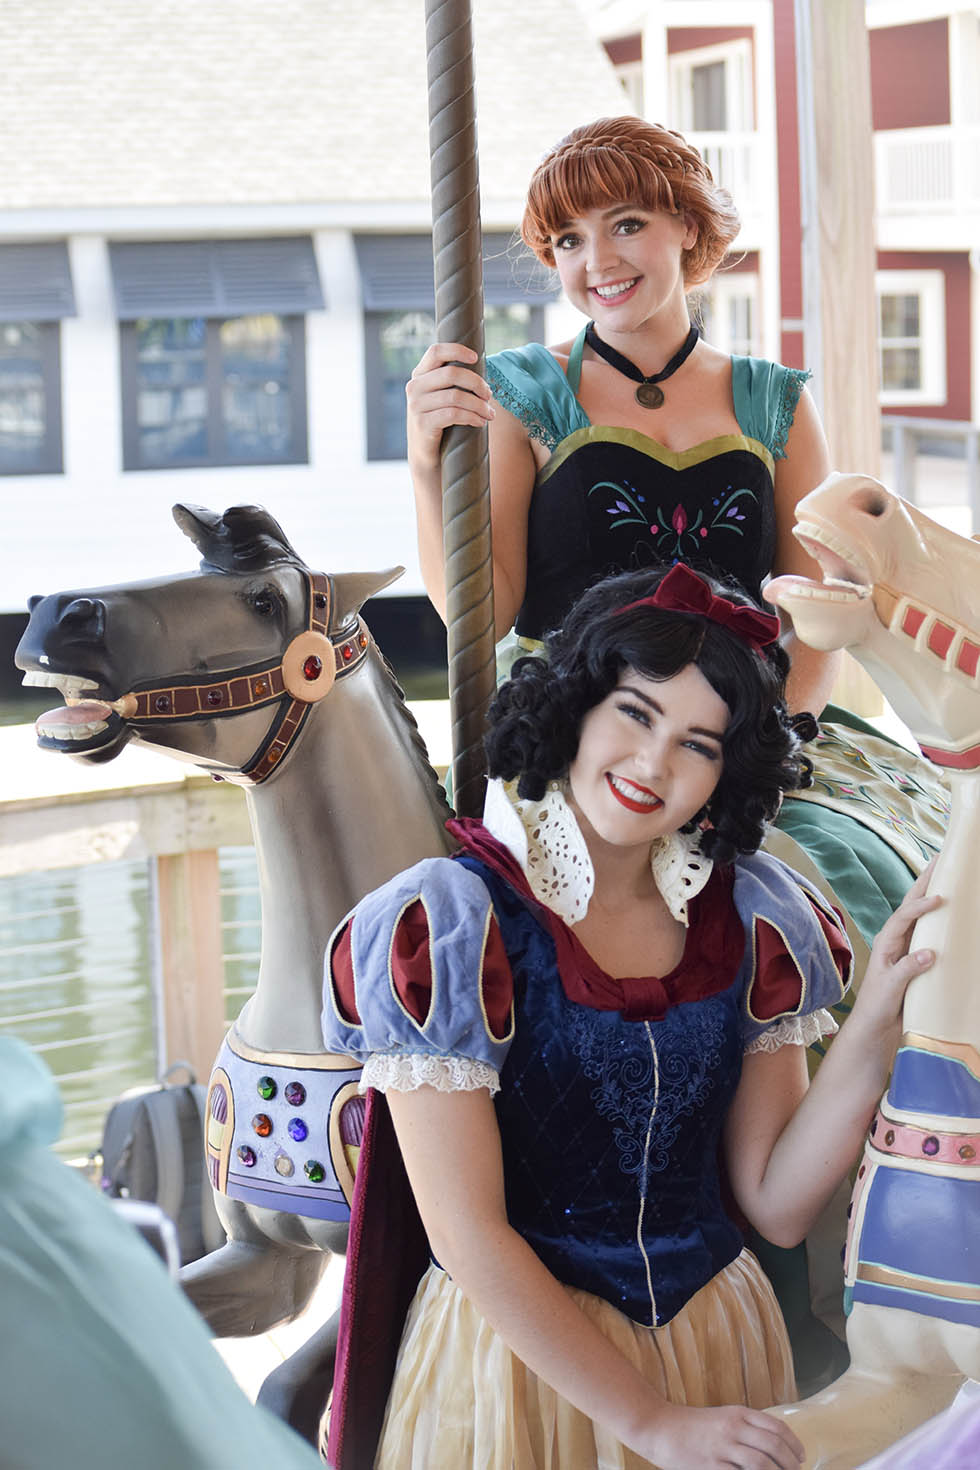 anna and snow white princess characters on carousel